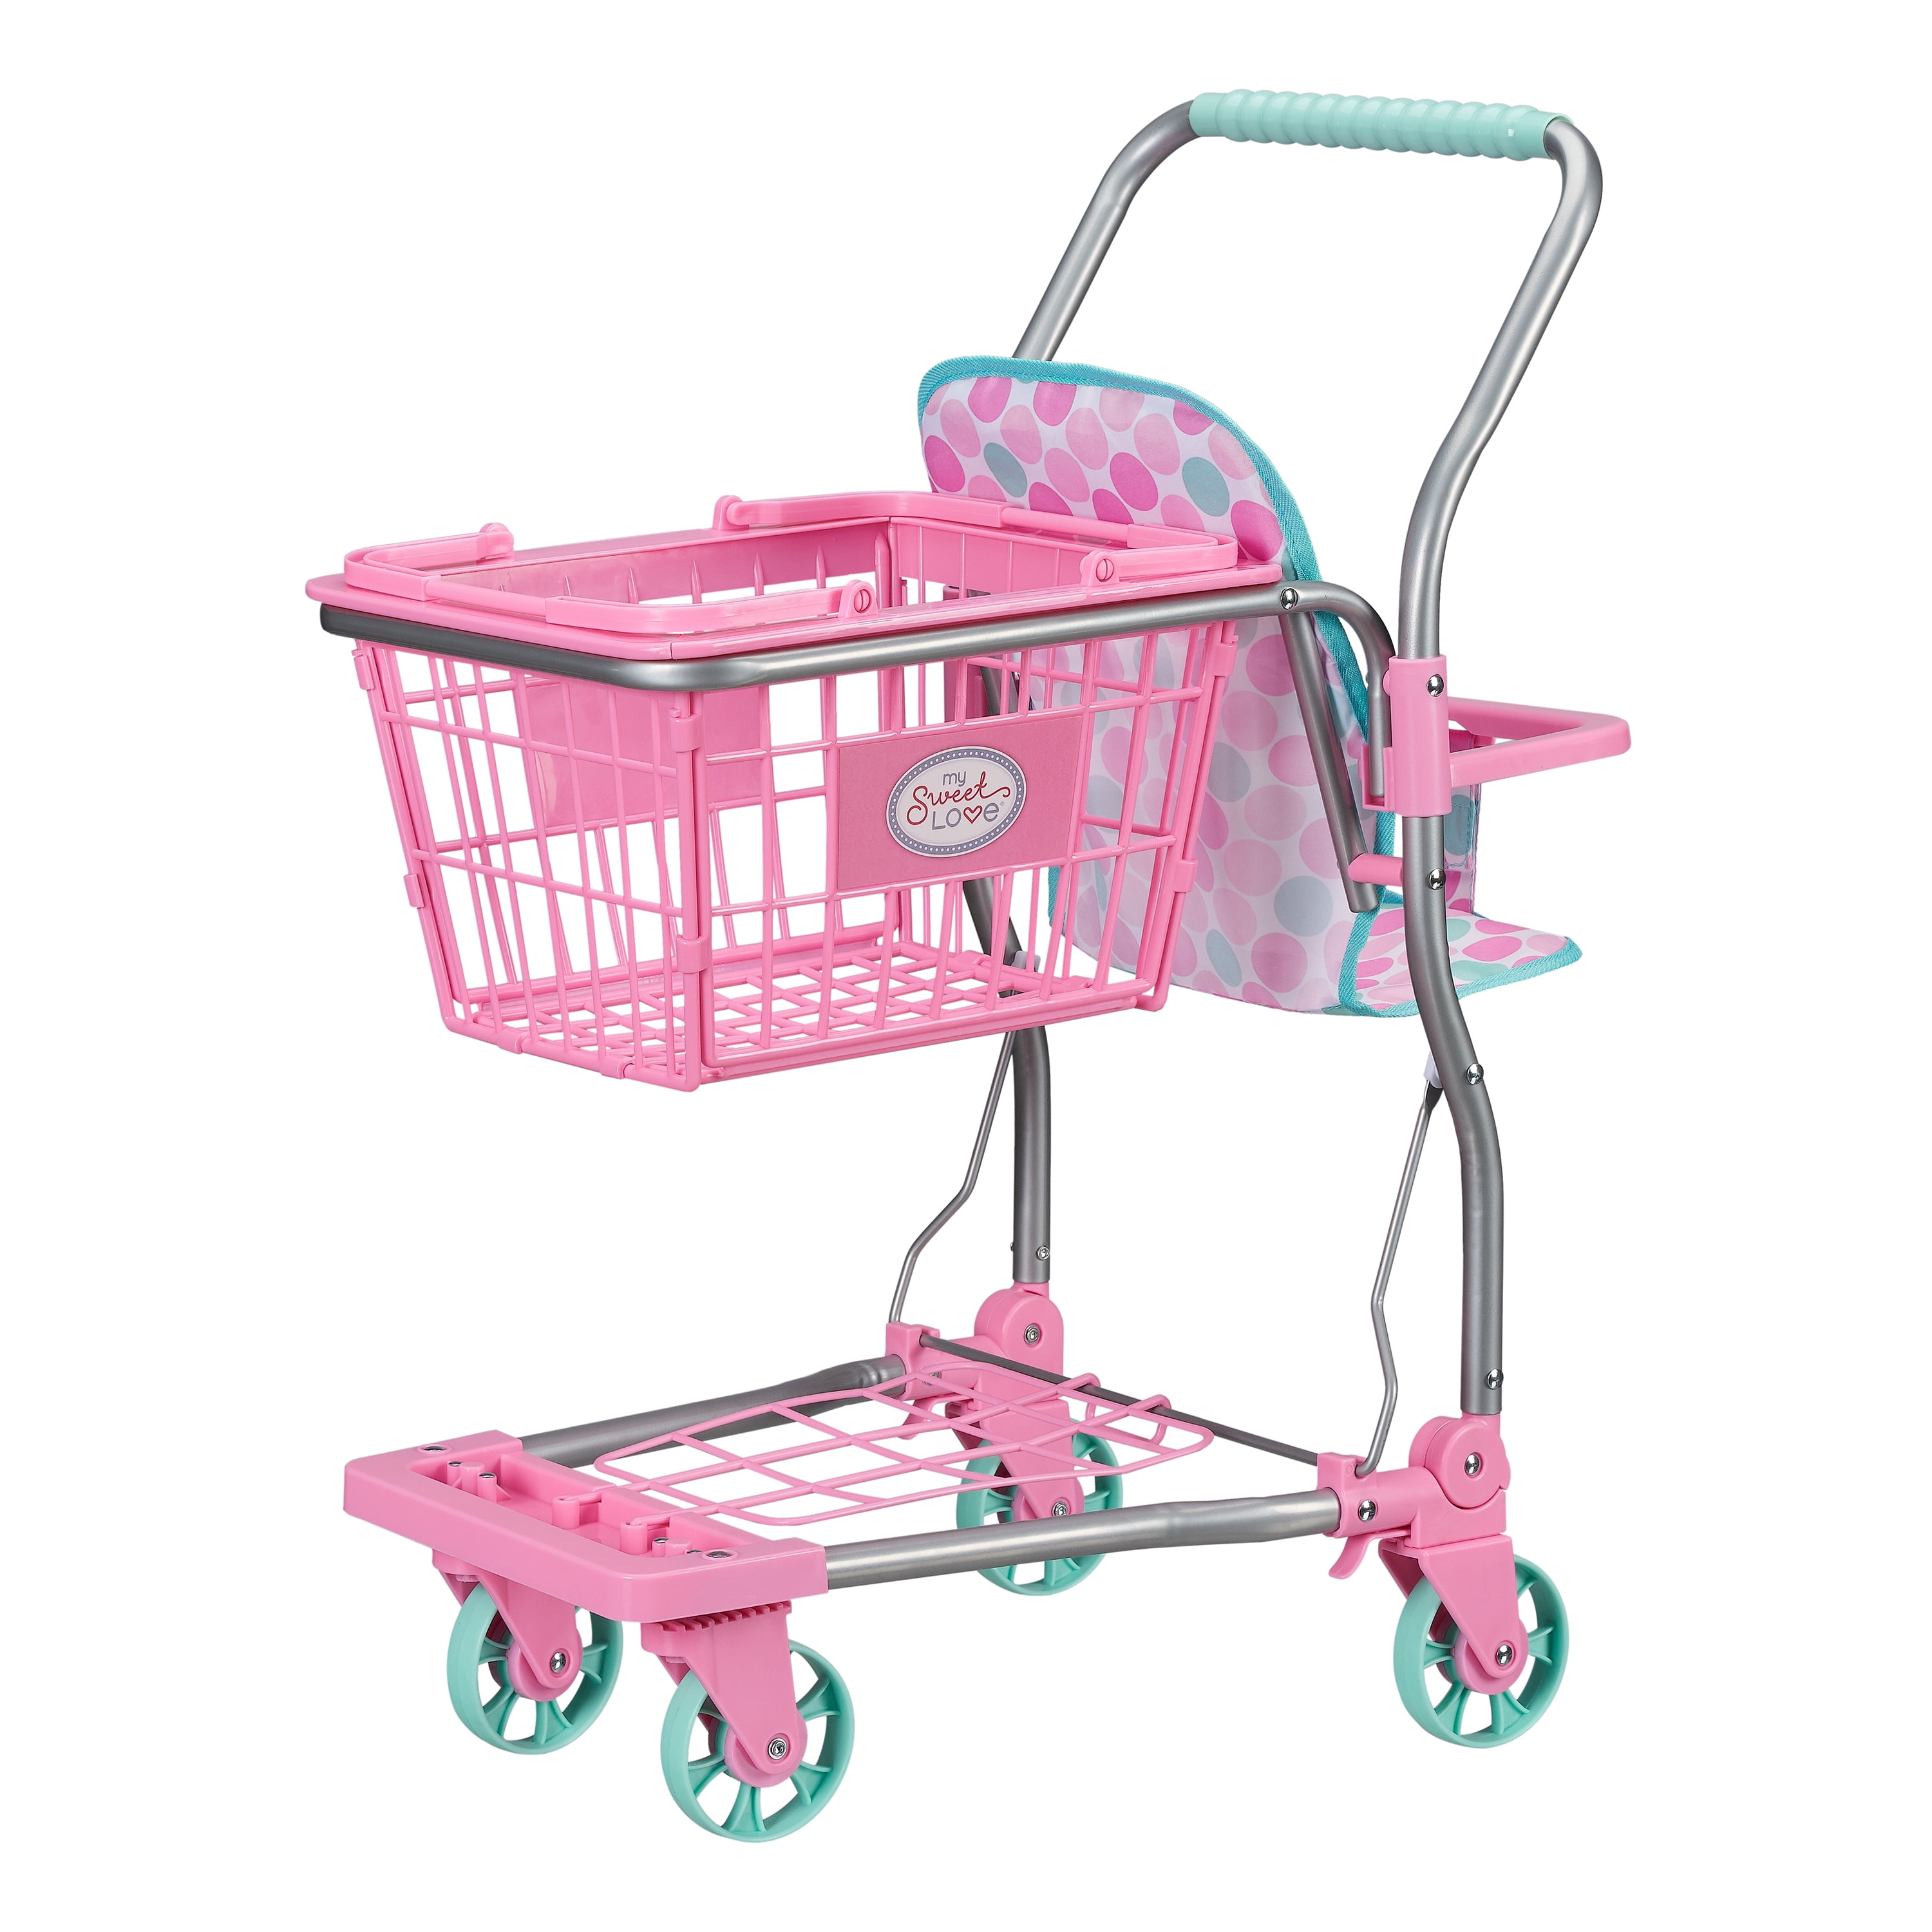 to manage Evacuation Release My Sweet Love Shopping Cart for 18" Dolls - Walmart.com